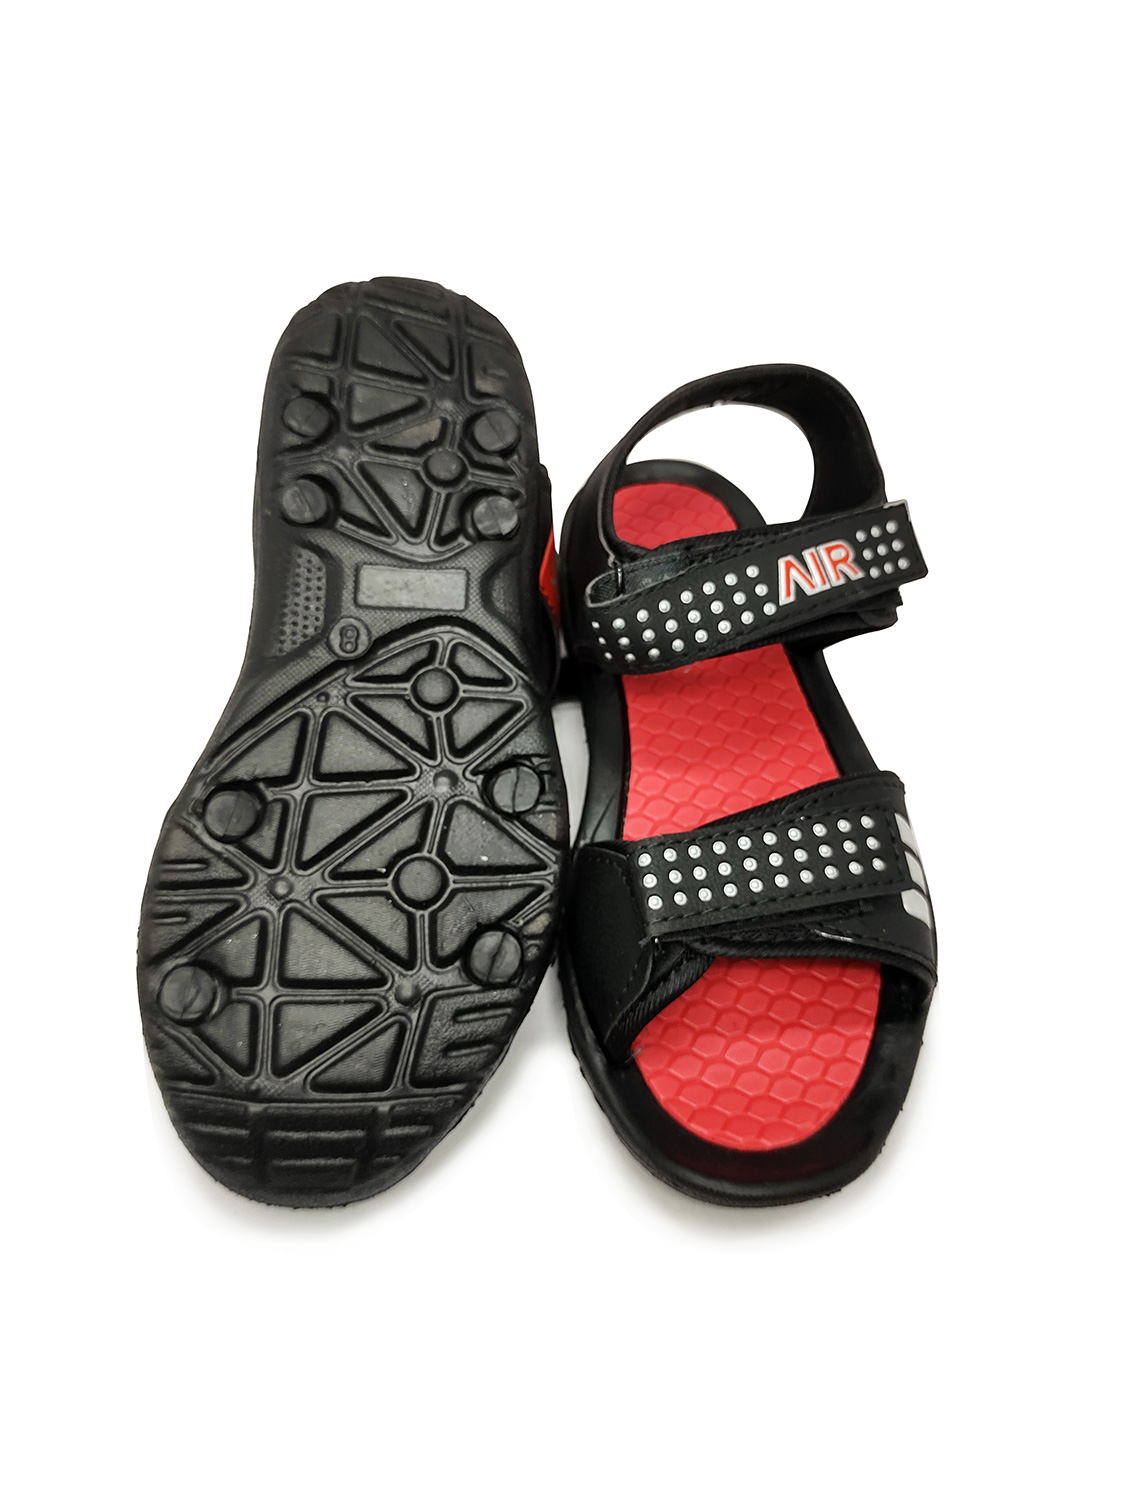 Sandals/Floaters for Baby Girls – Kidonex